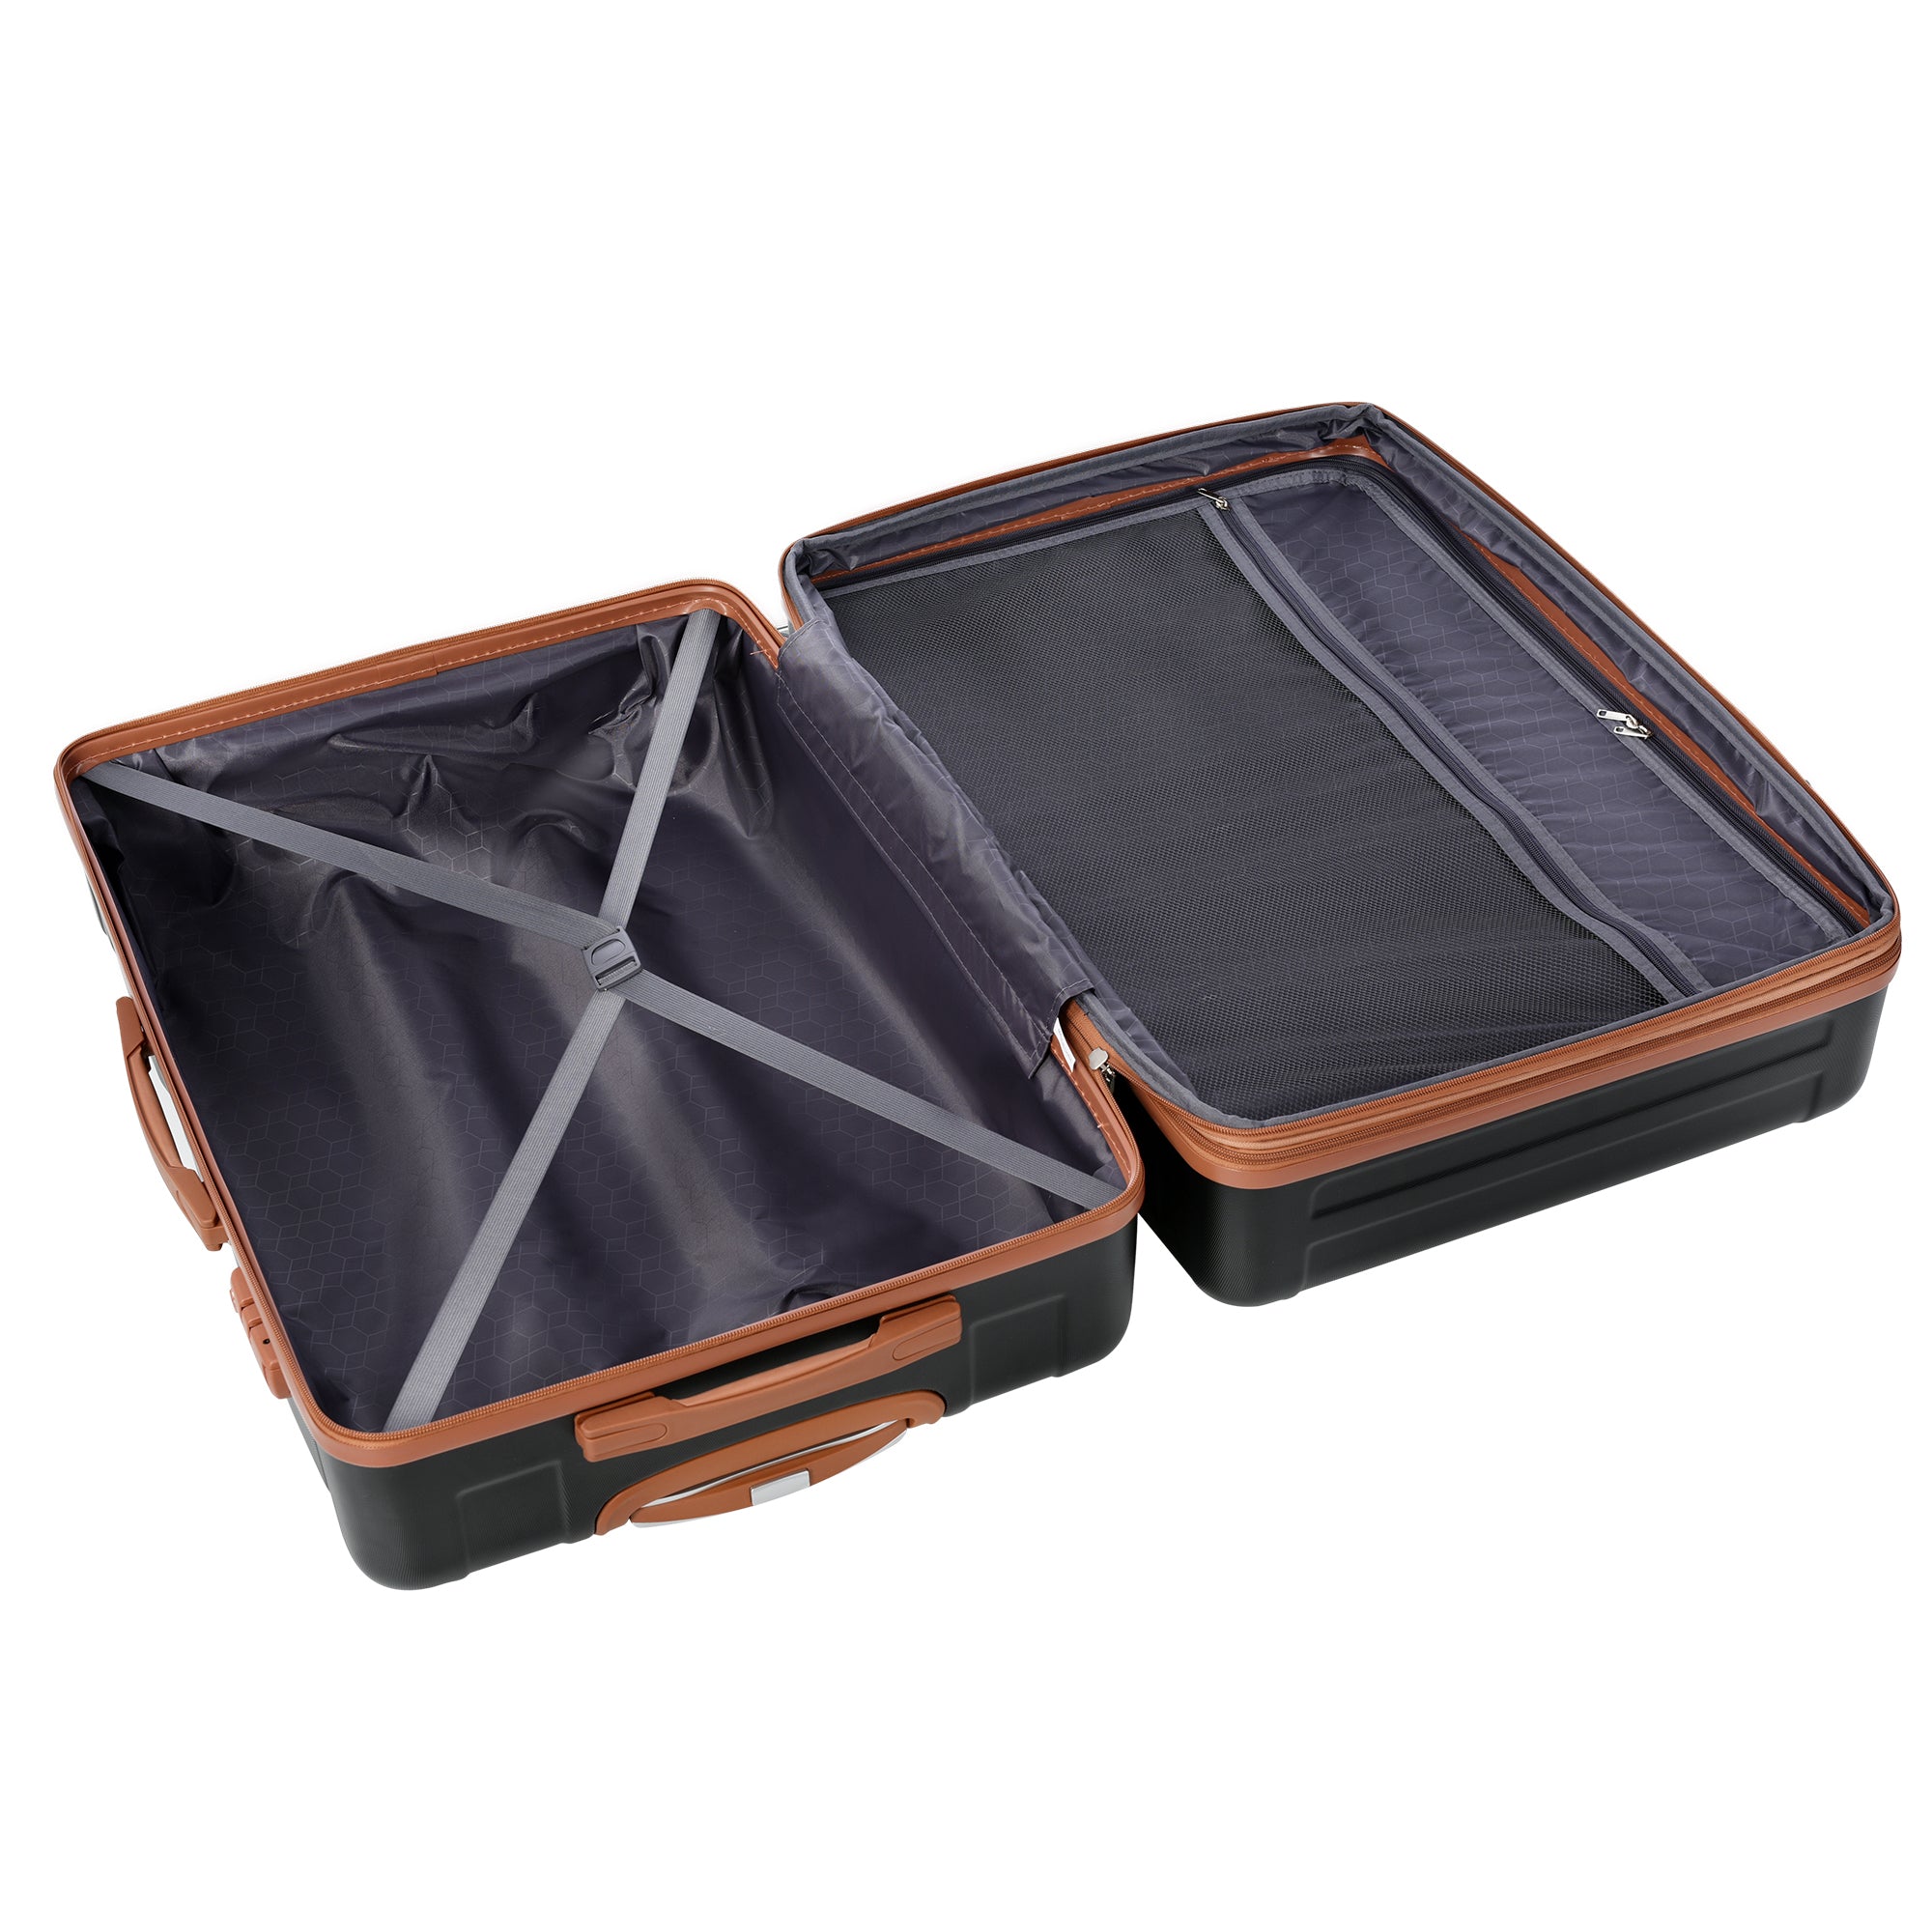 Luggage Sets Model Expandable ABS Hardshell 3pcs black+brown-abs